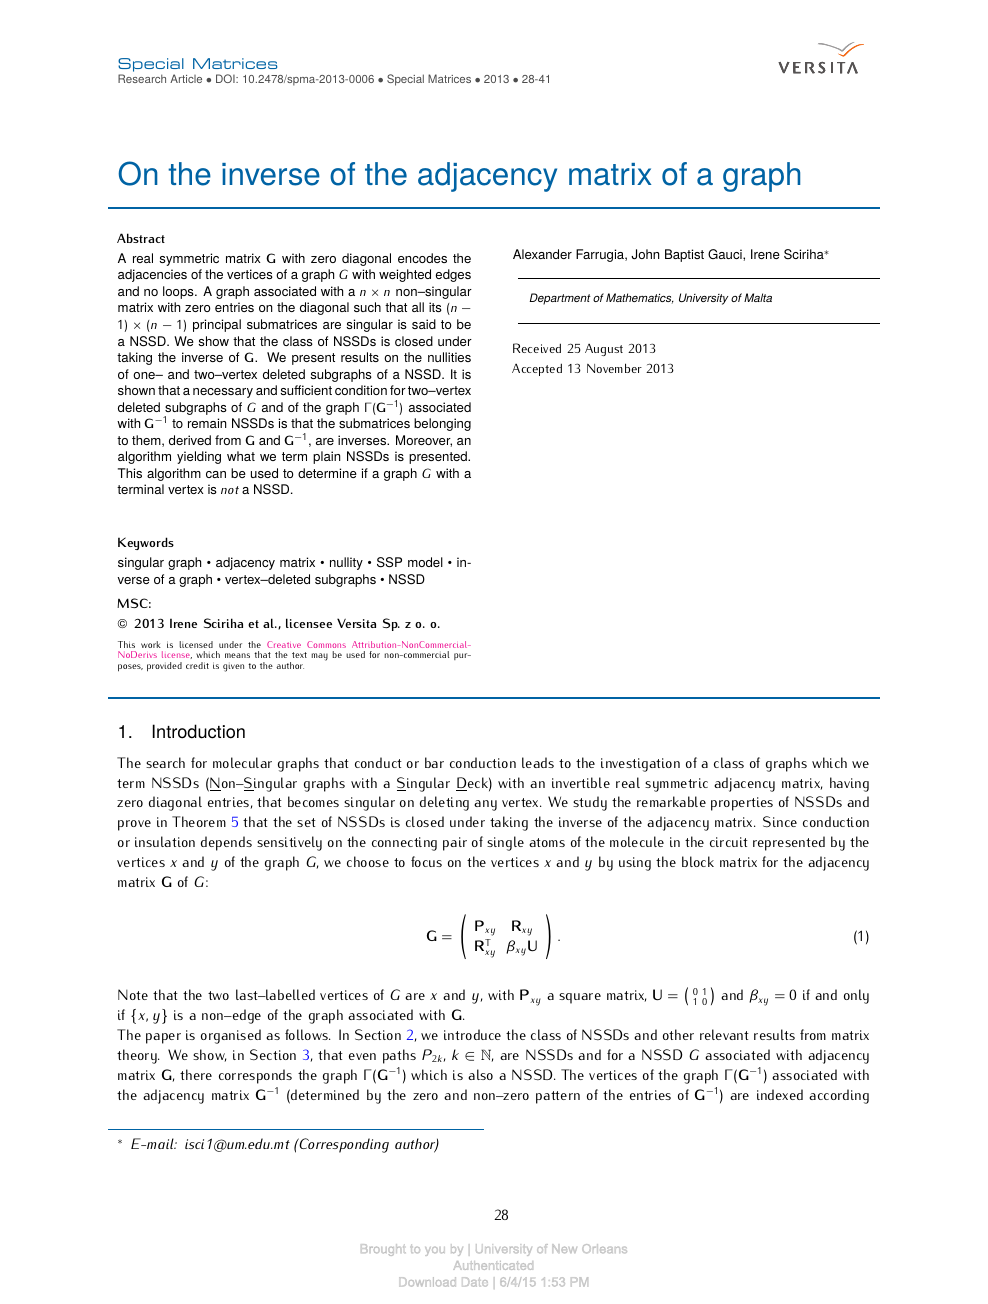 On The Inverse Of The Adjacency Matrix Of A Graph Topic Of Research Paper In Computer And Information Sciences Download Scholarly Article Pdf And Read For Free On Cyberleninka Open Science